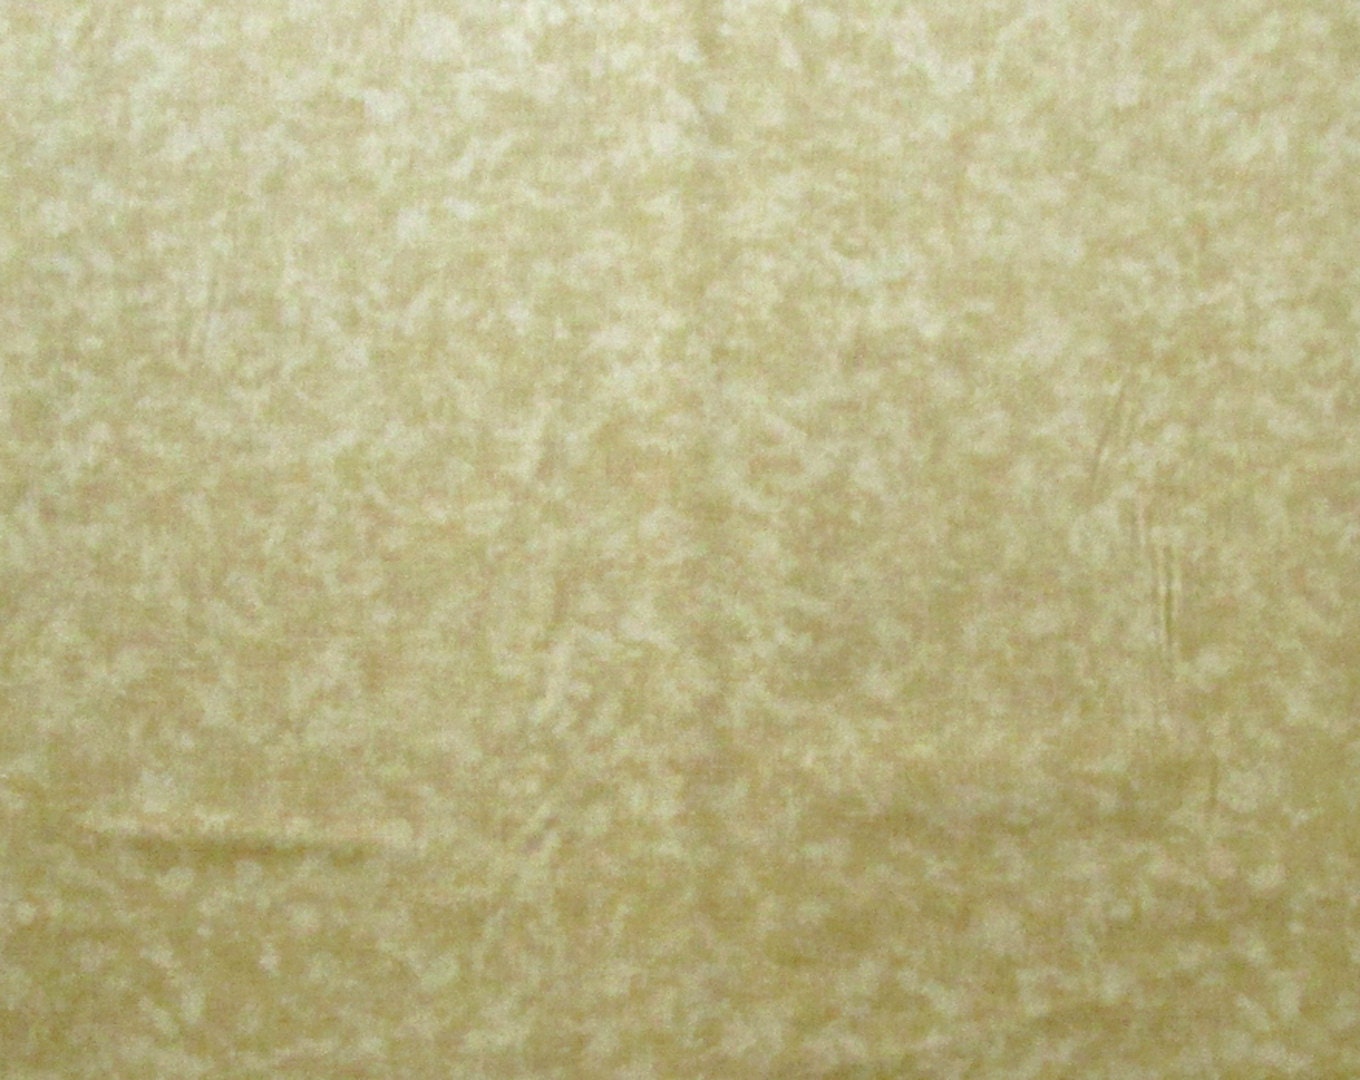 Light Pale Yellow Gold Tan Blender Quilter's Weight Cotton Print Fabric - Material Yardage